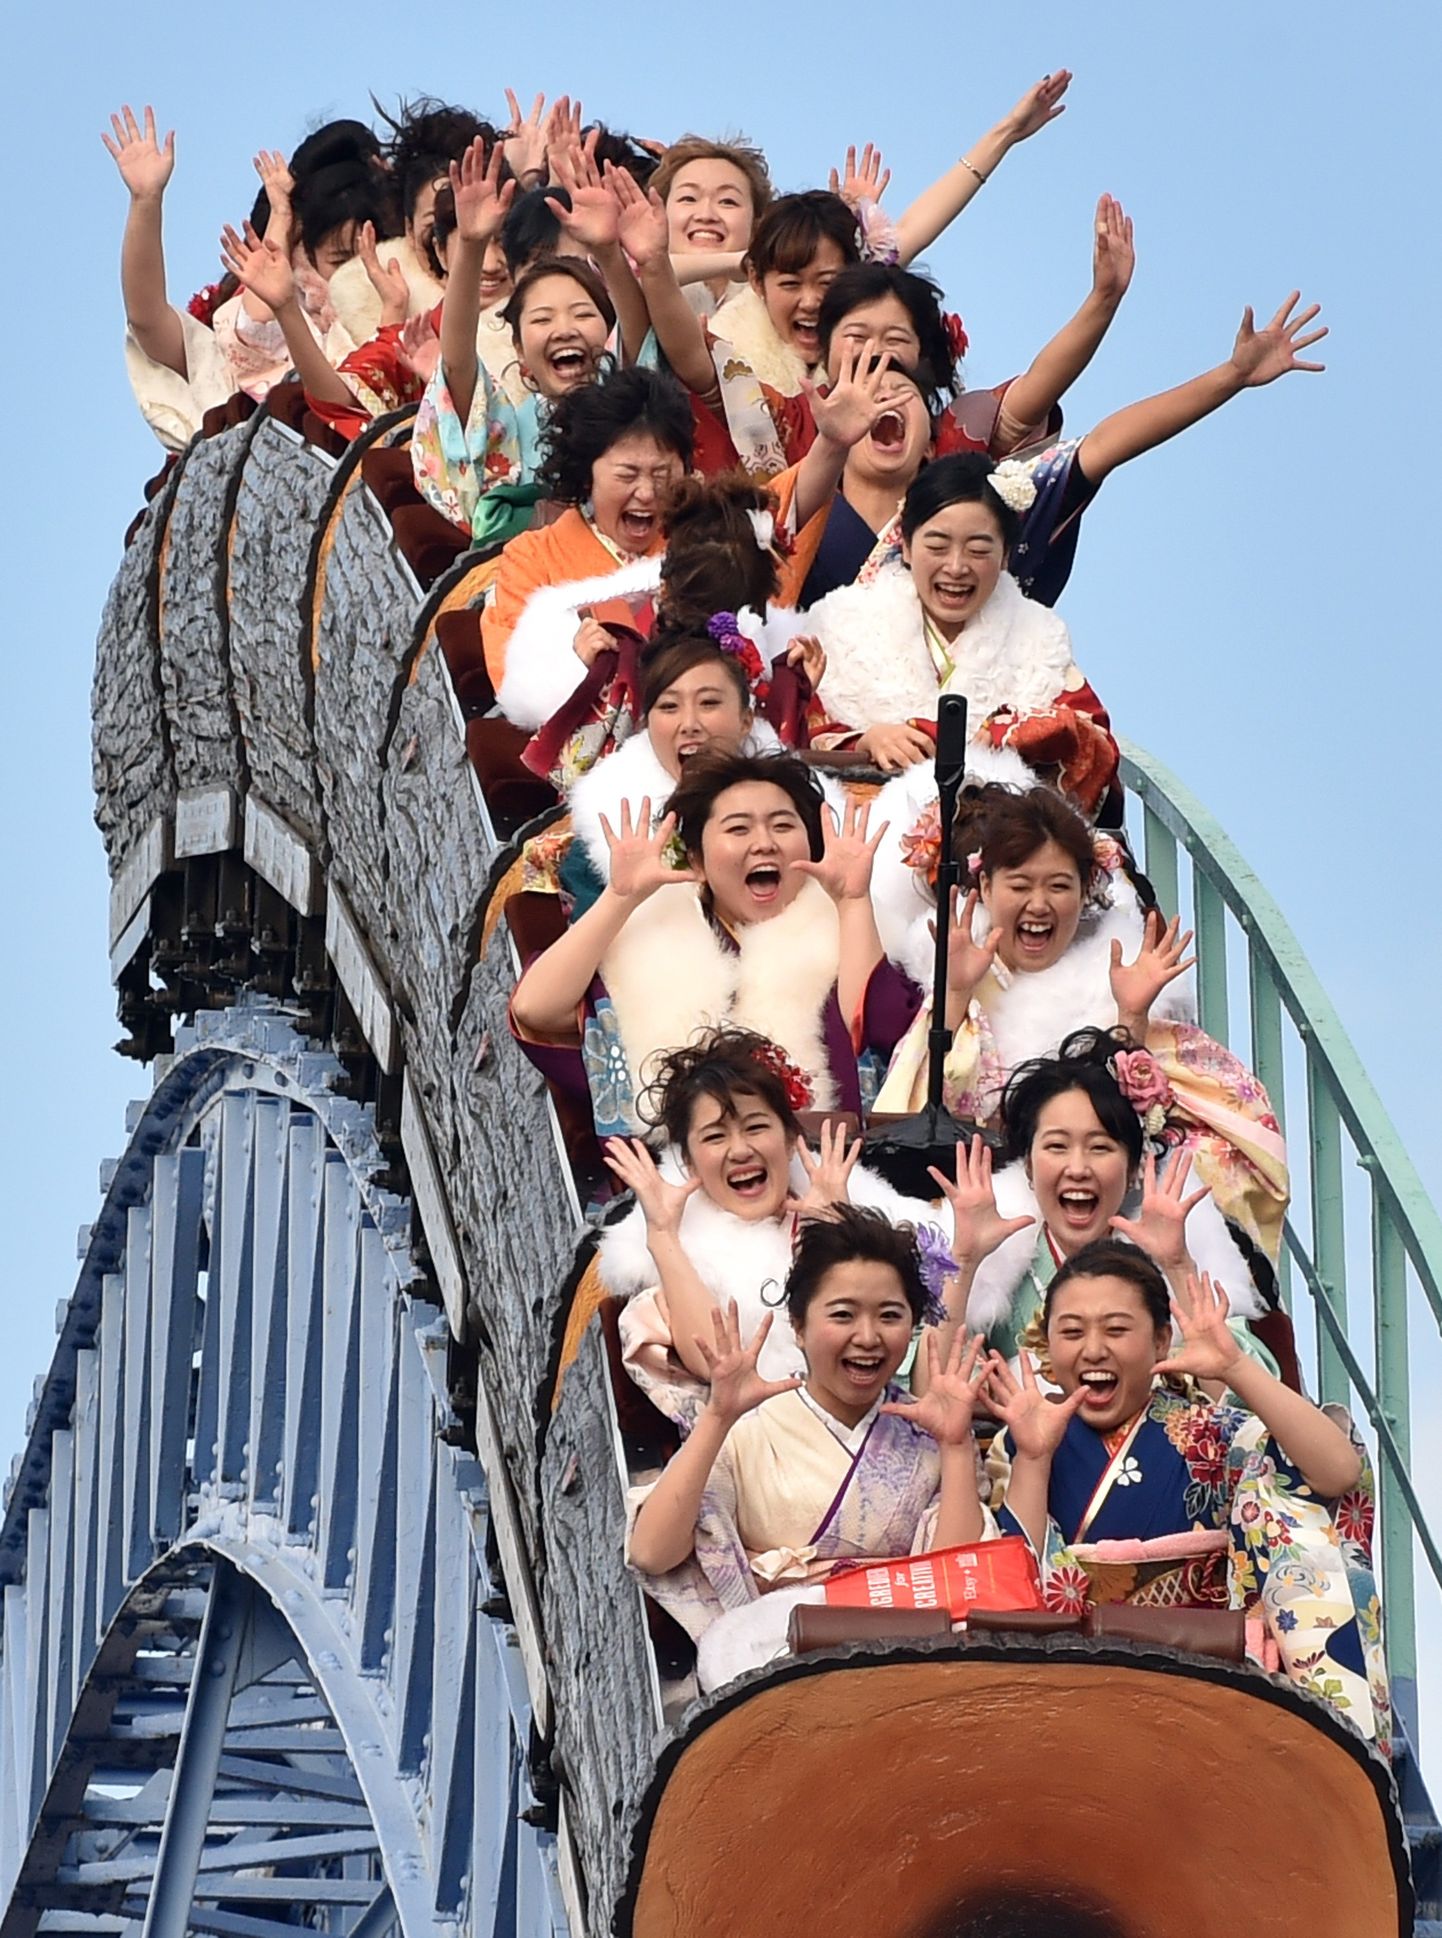 Twenty-year-old women wearing kimonos ride a rollercoaster after attending a "Coming-of-Age Day" celebration at the Toshimaen amusement park in Tokyo on January 11, 2016. The number of people celebrating "Coming-of-Age Day" in 2016, or adulthood - high by world standards at age 20 - is estimated to stand at 1.21 million, a decrease of 50,000 from the previous year. Every January, Japanese turning 20 celebrate Coming of Age Day, in which the new adults dress in formal kimonos, pray at Shinto shrines and hear speeches from local officials on their new responsibilities.     AFP PHOTO / KAZUHIRO NOGI